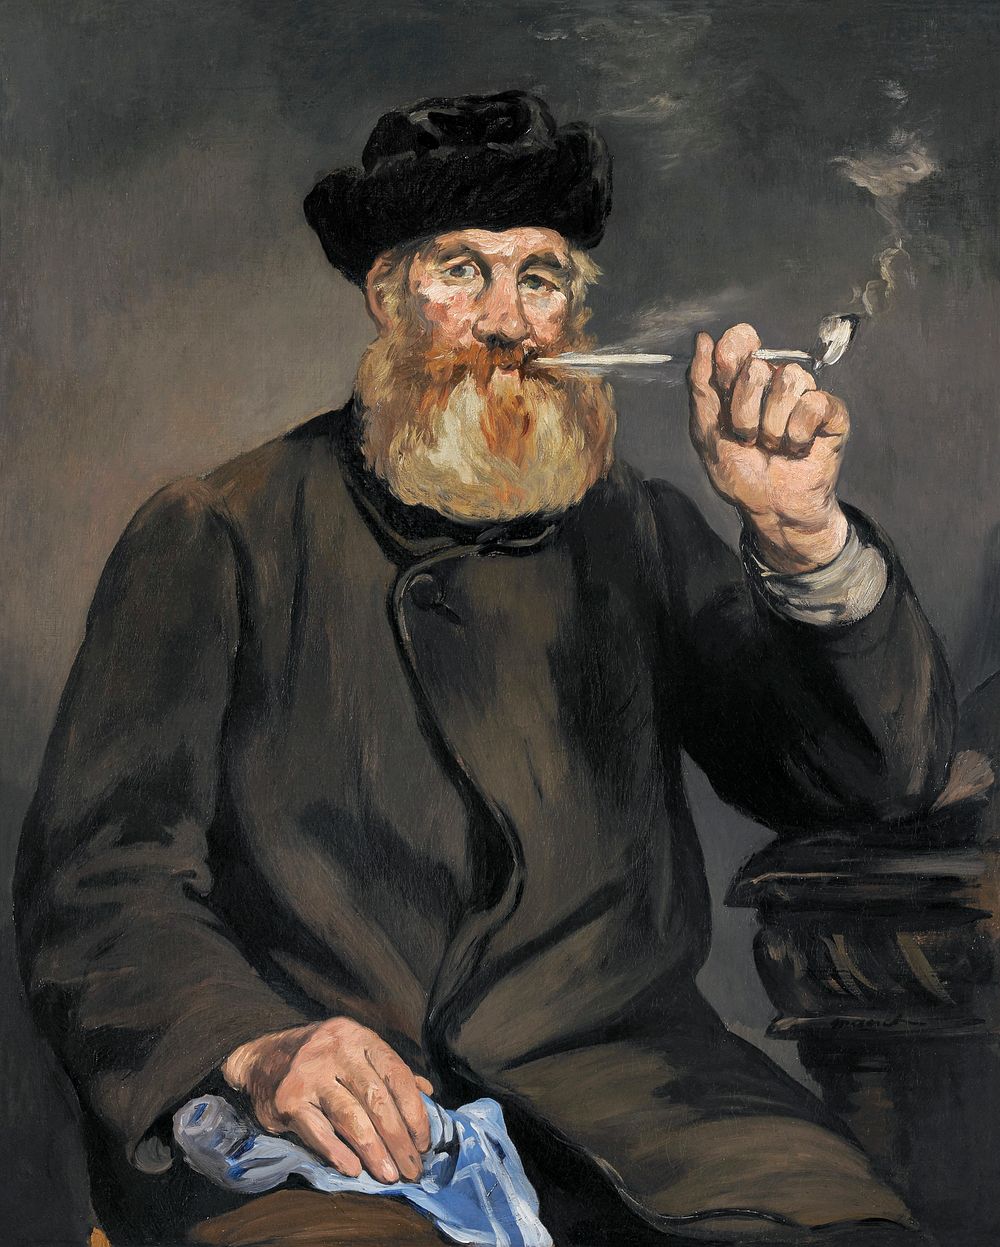 The Smoker (1866) painting in high resolution by Edouard Manet. Original from The Minneapolis Institute of Art. Digitally…